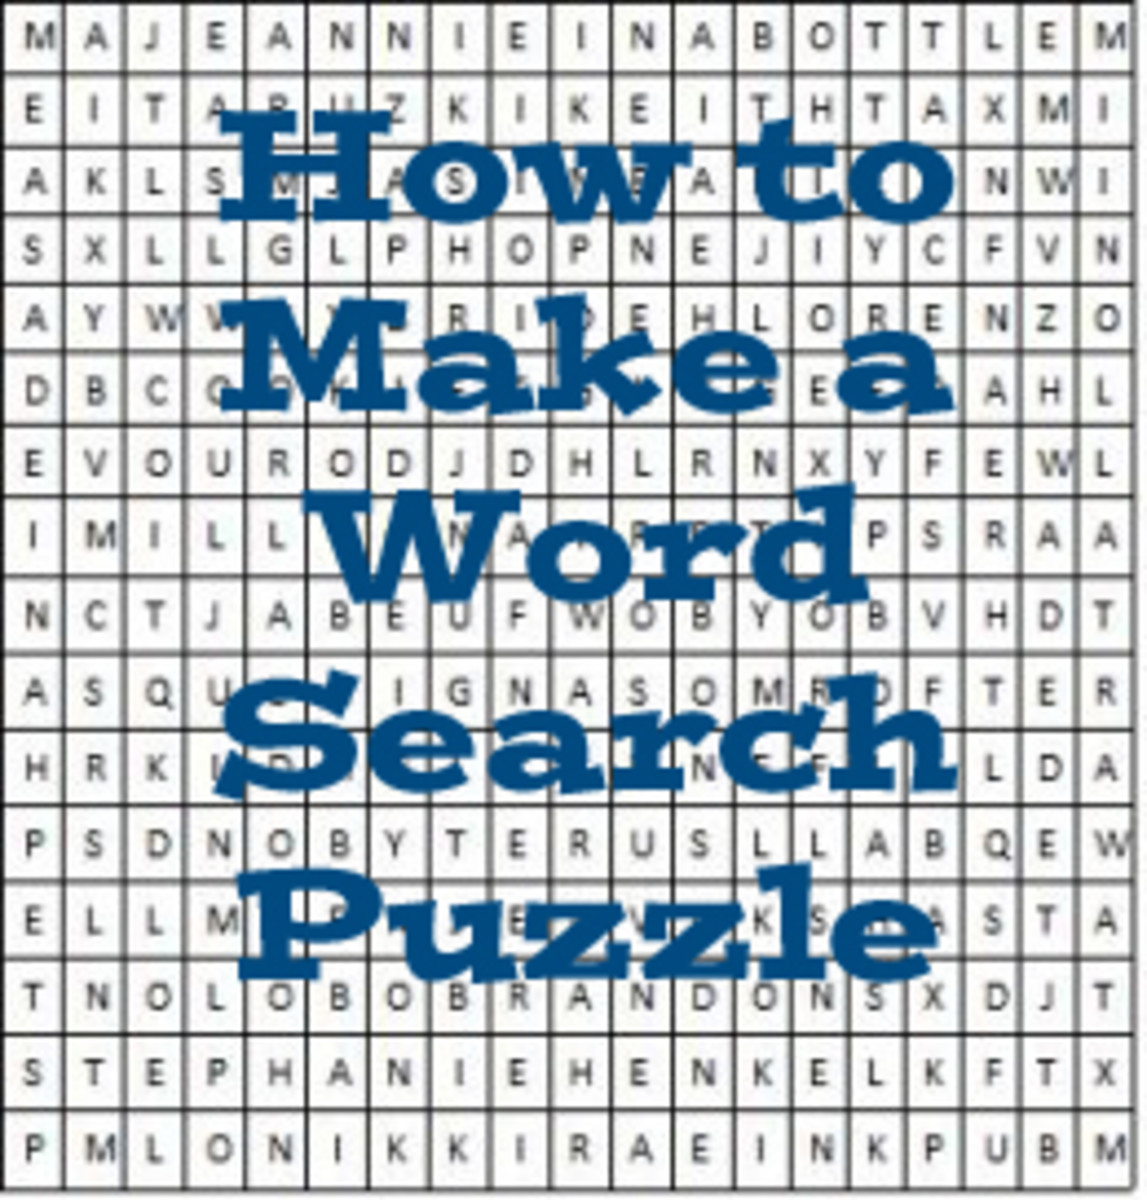 5 Easy Steps to Create Your Own Word Search Puzzle | HobbyLark